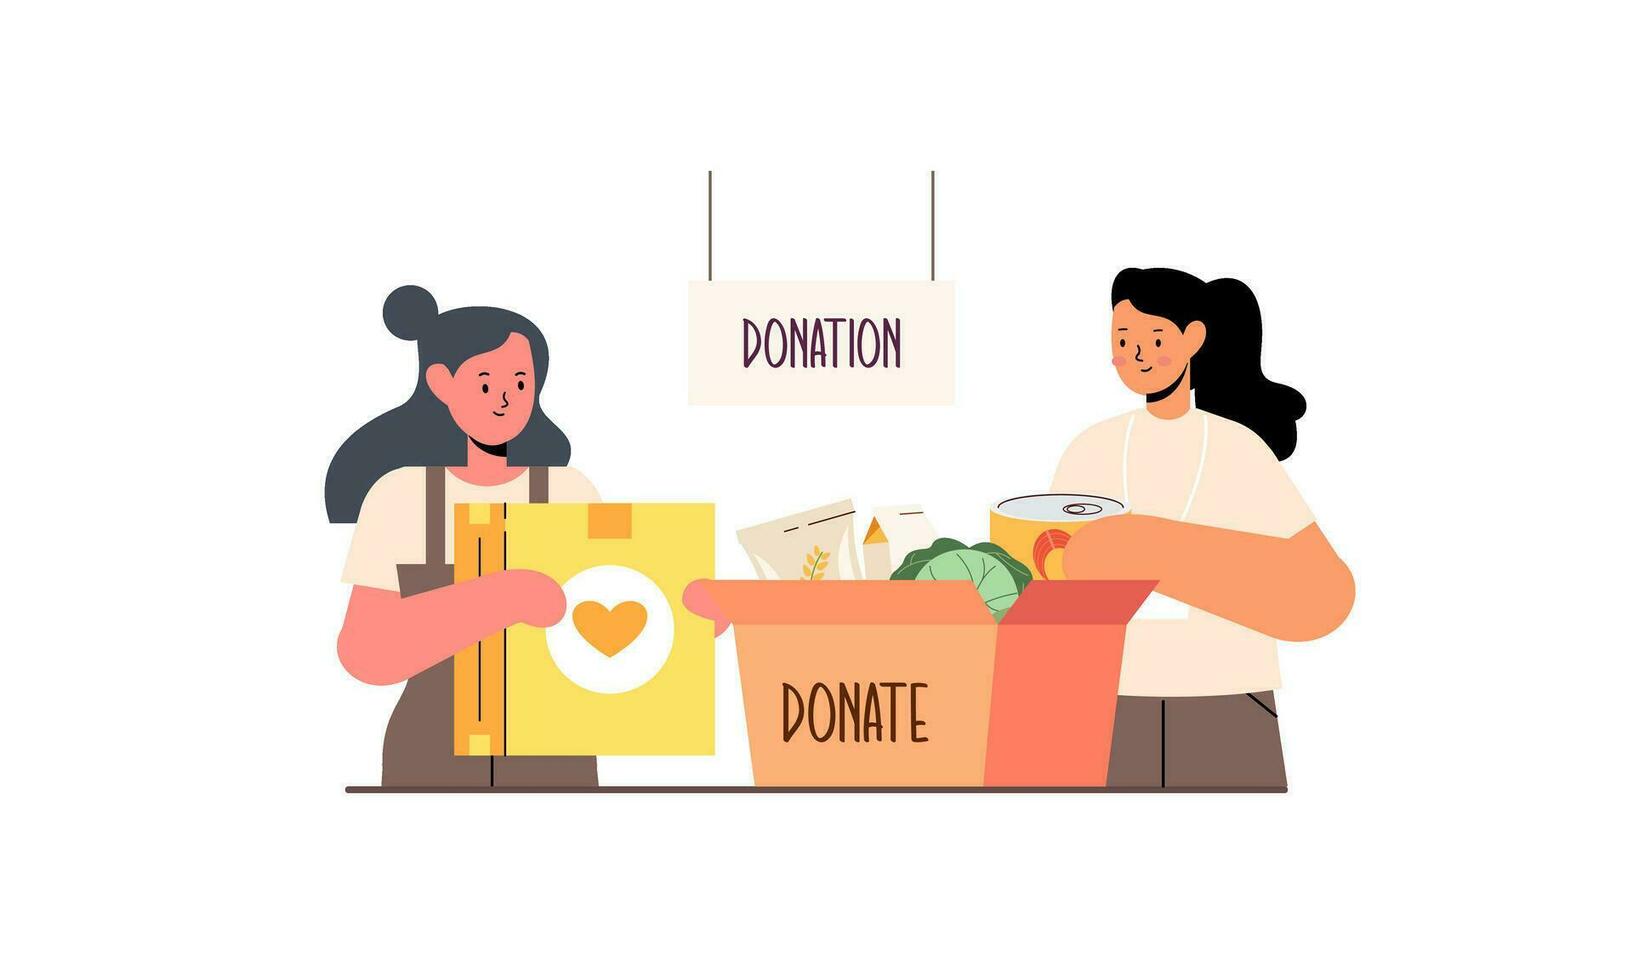 Donation and charity concept sorting donated toys into boxes for poor children illustration vector